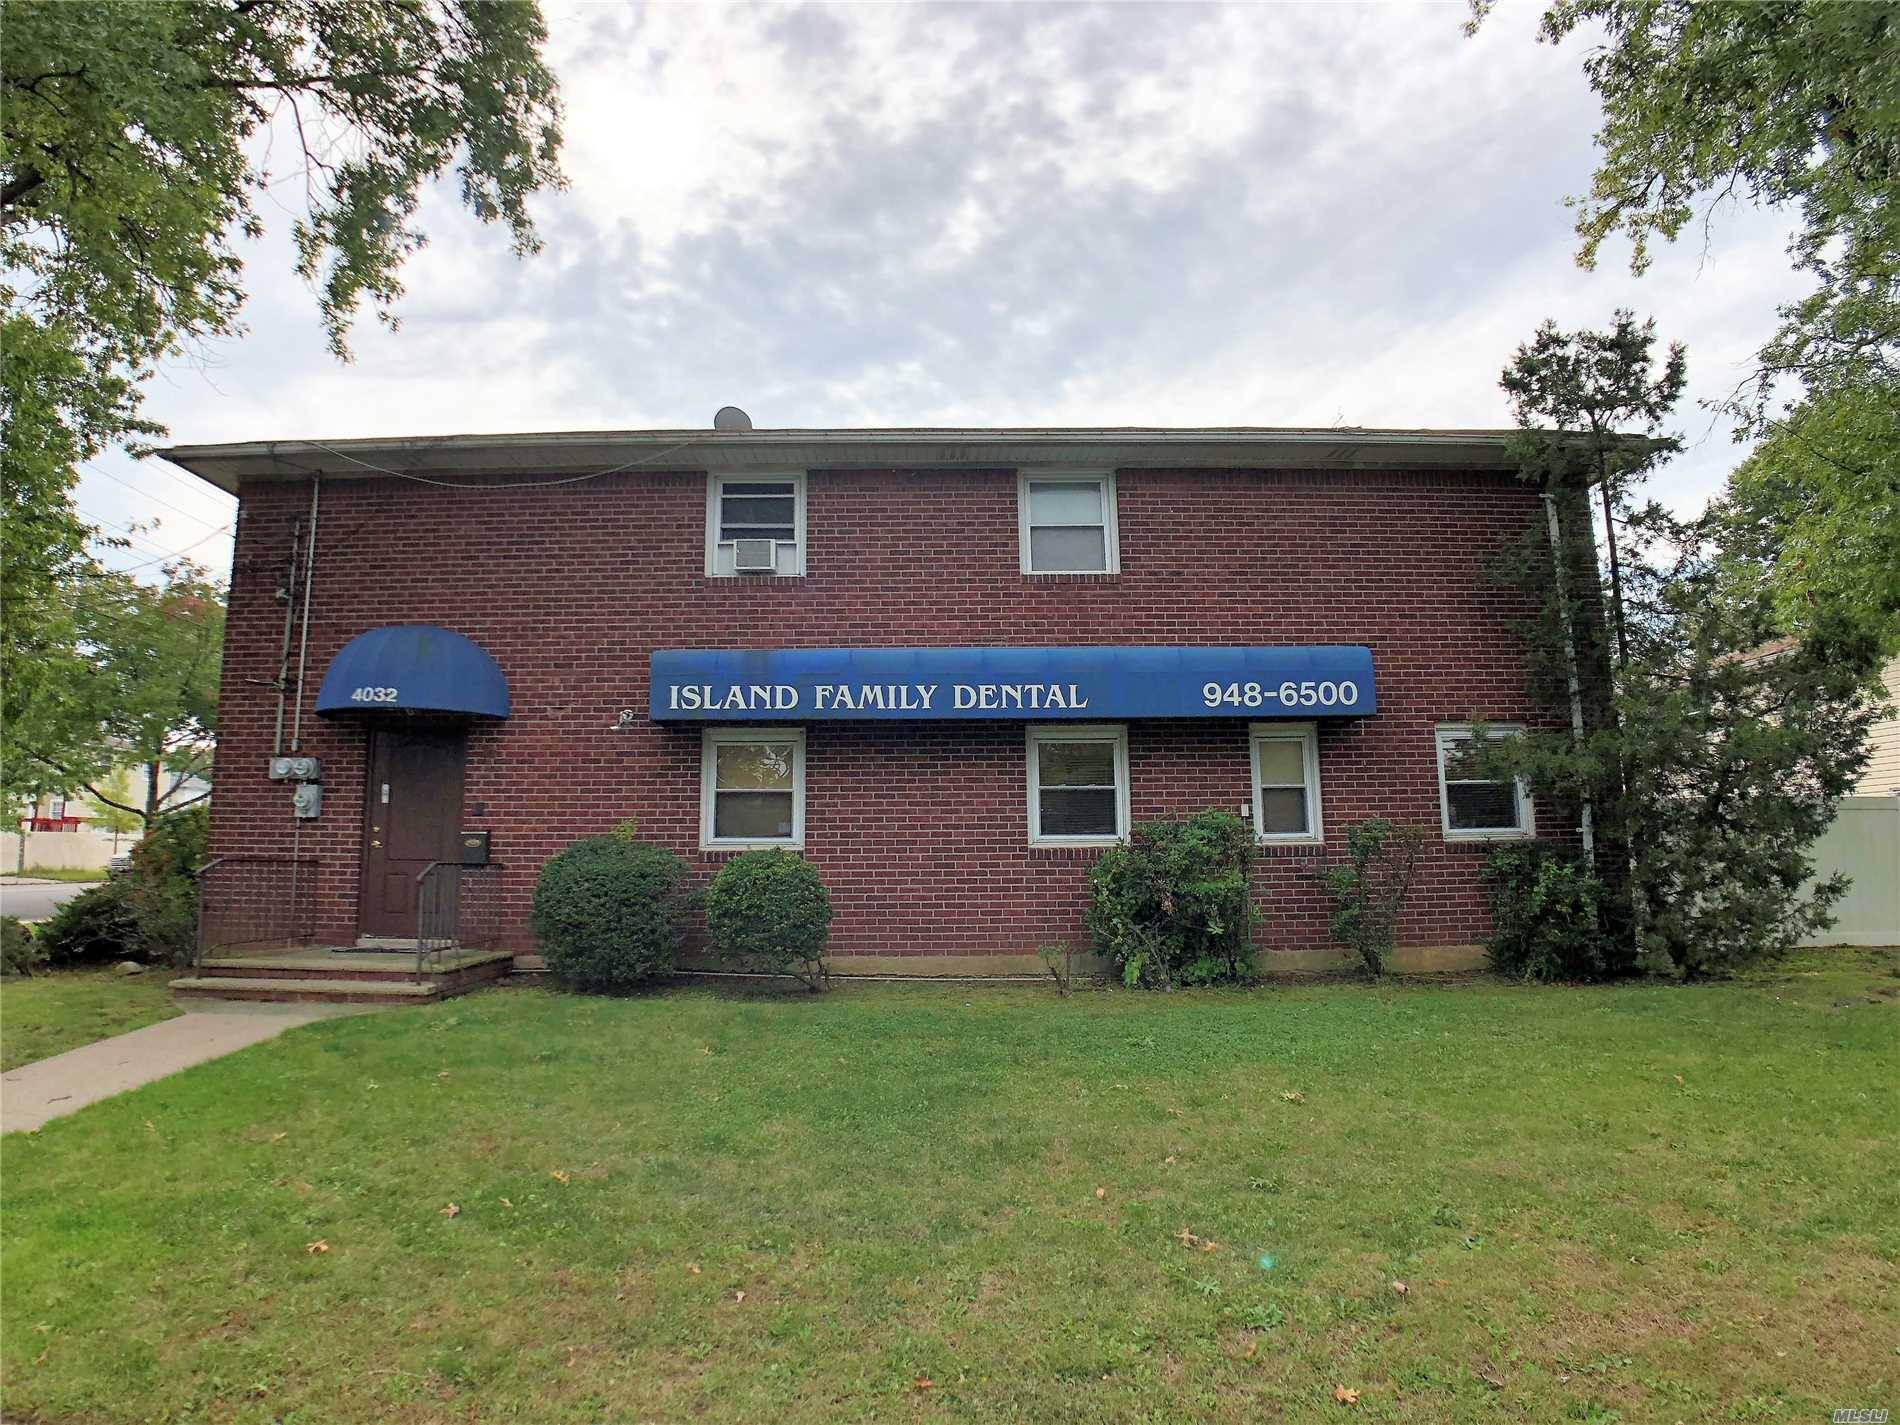 Location ! Rare 6 Cap Opportunity To Invest And Own A Dental Building W 3 Bed Apt On Top In Exclusive Eltingville Area Of Staten Island.